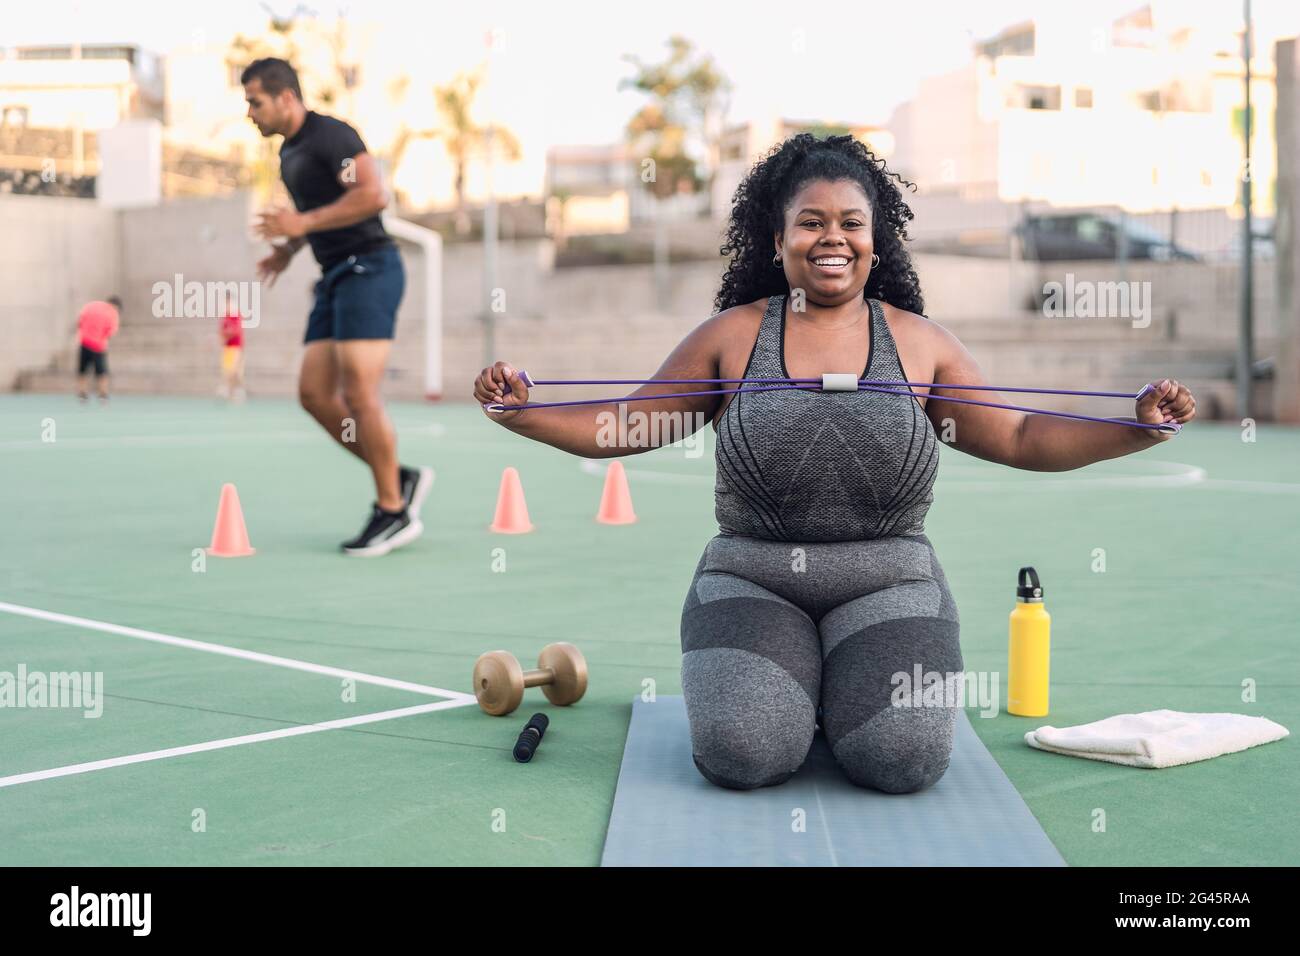 Curvy Afro woman doing workout exercises session - Young African female having fun training outdoor - Sporty people lifestyle concept Stock Photo